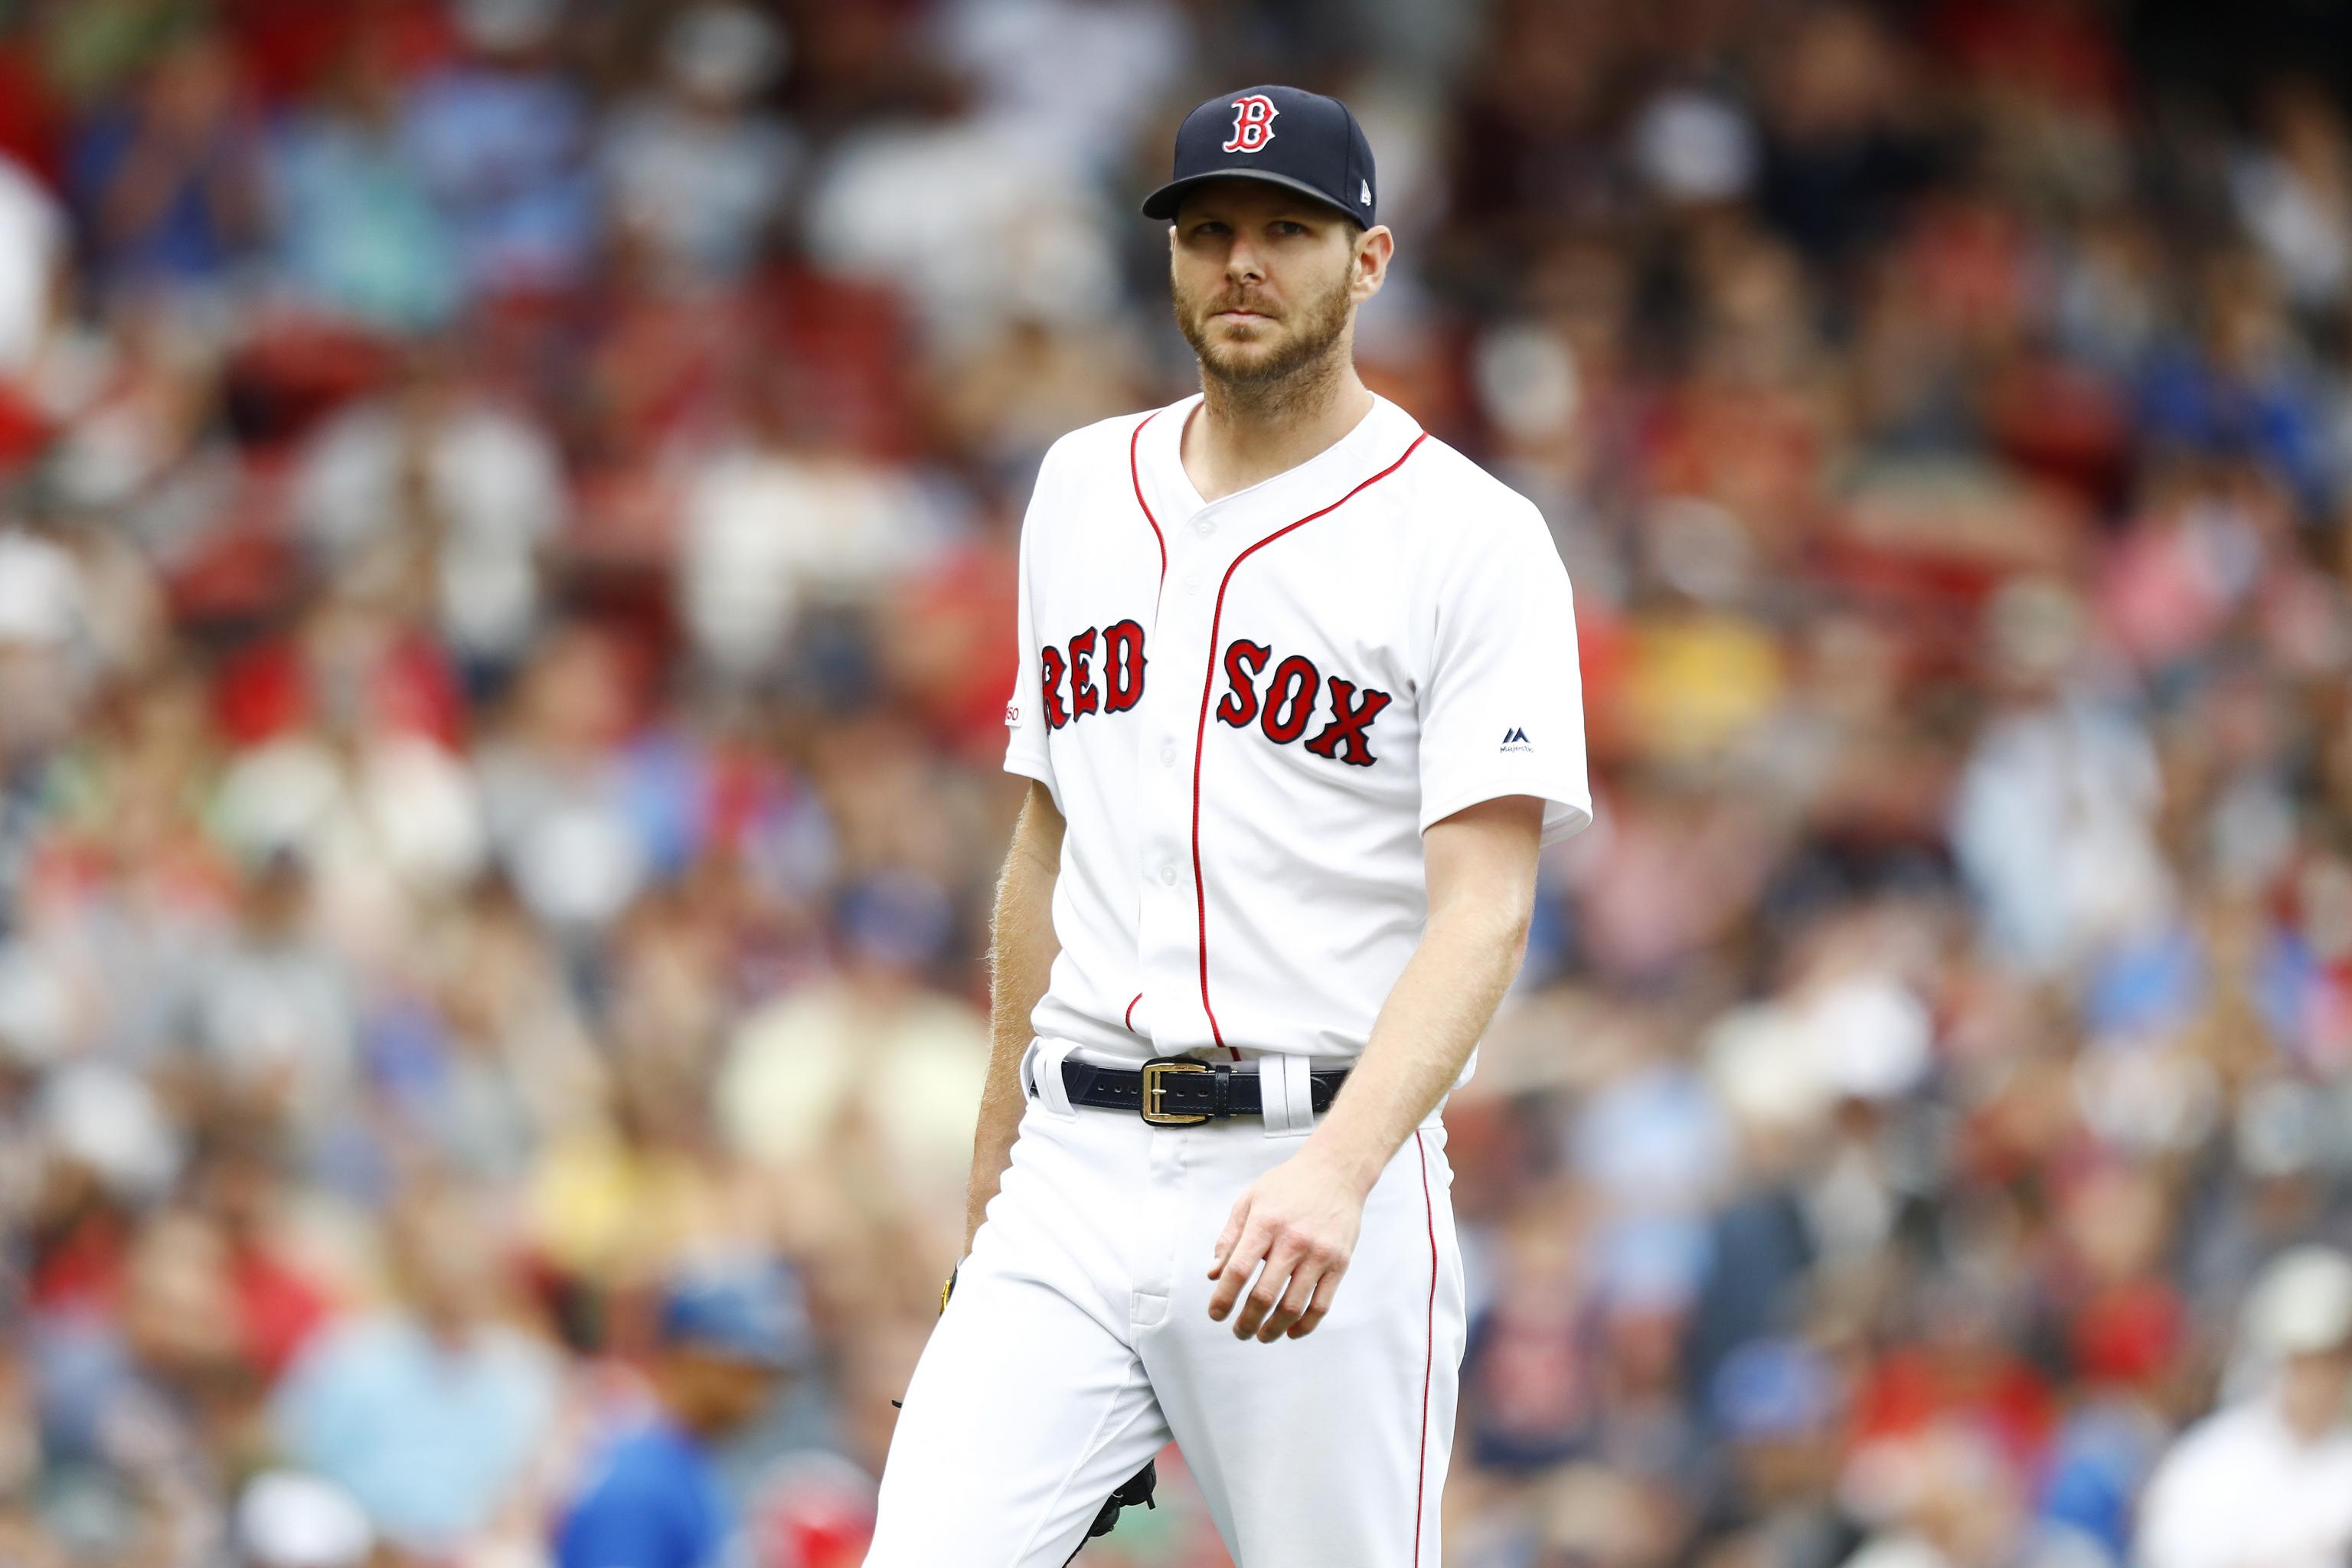 Chris Sale and his faulty elbow